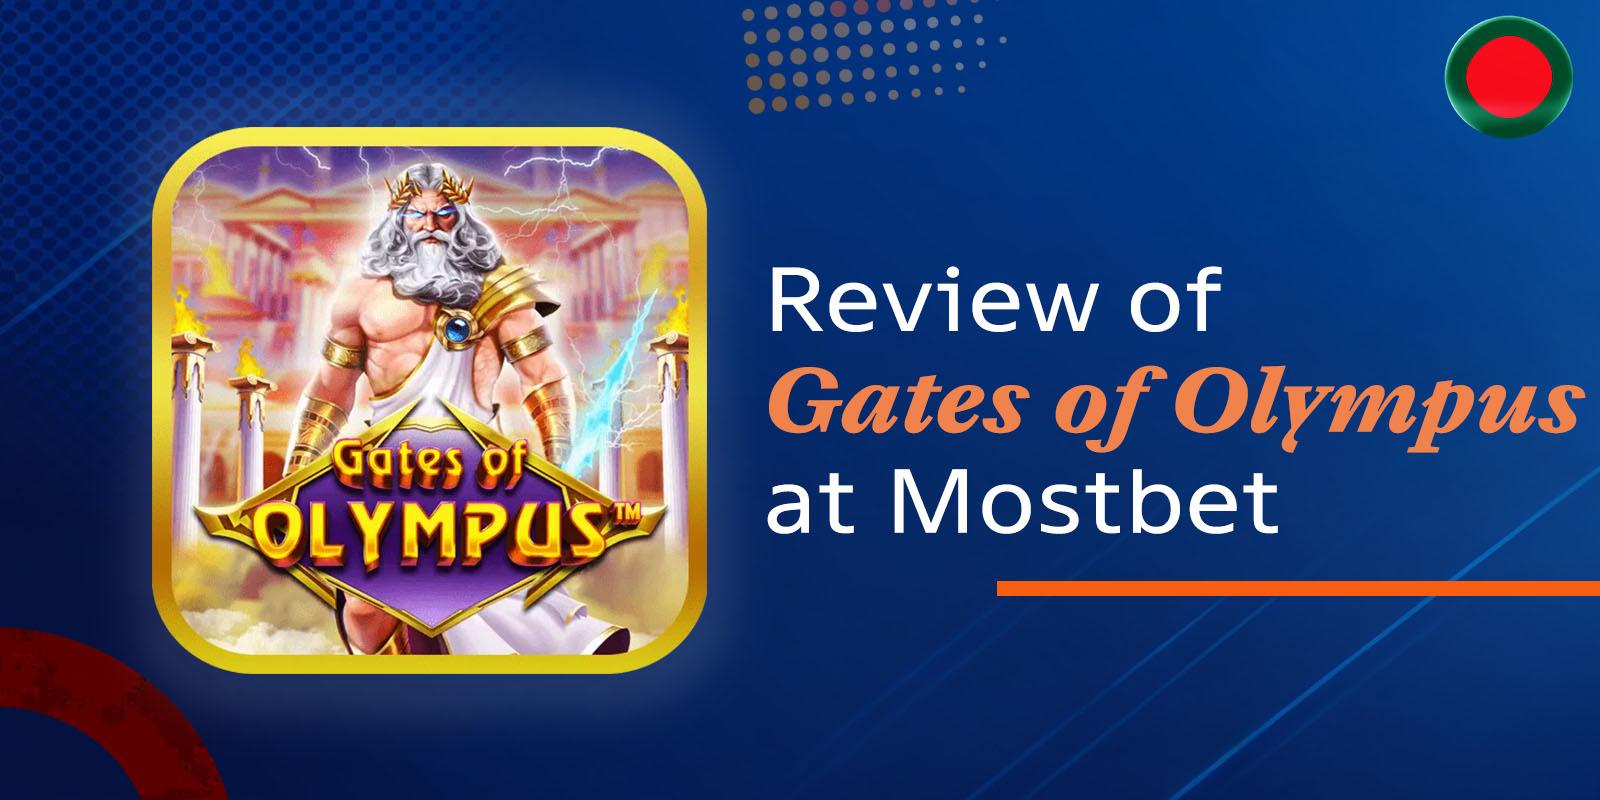 About Gates of Olympus